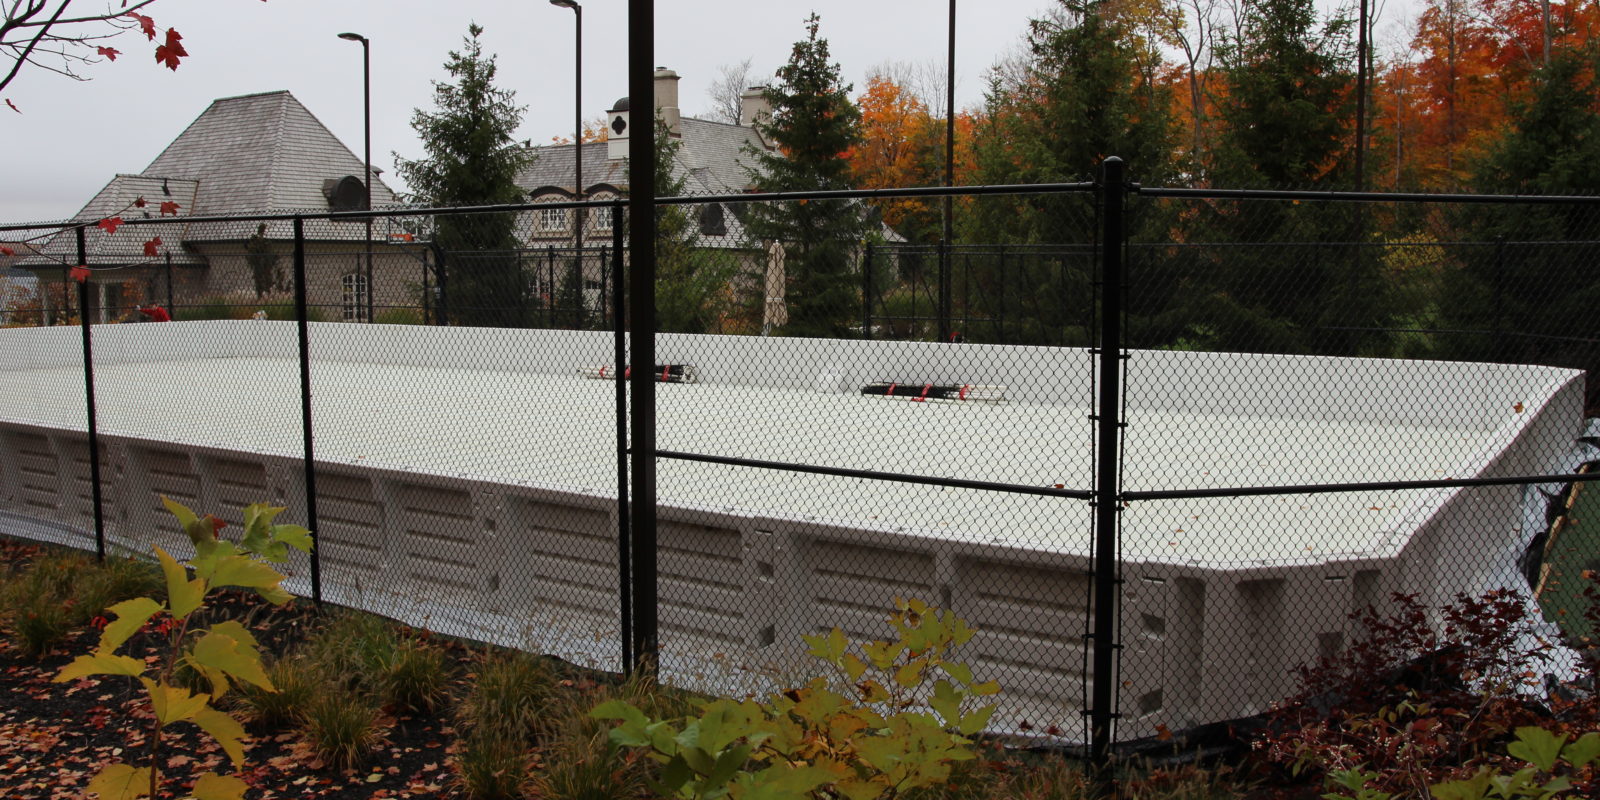 Portable refrigerated ice rink on tennis court